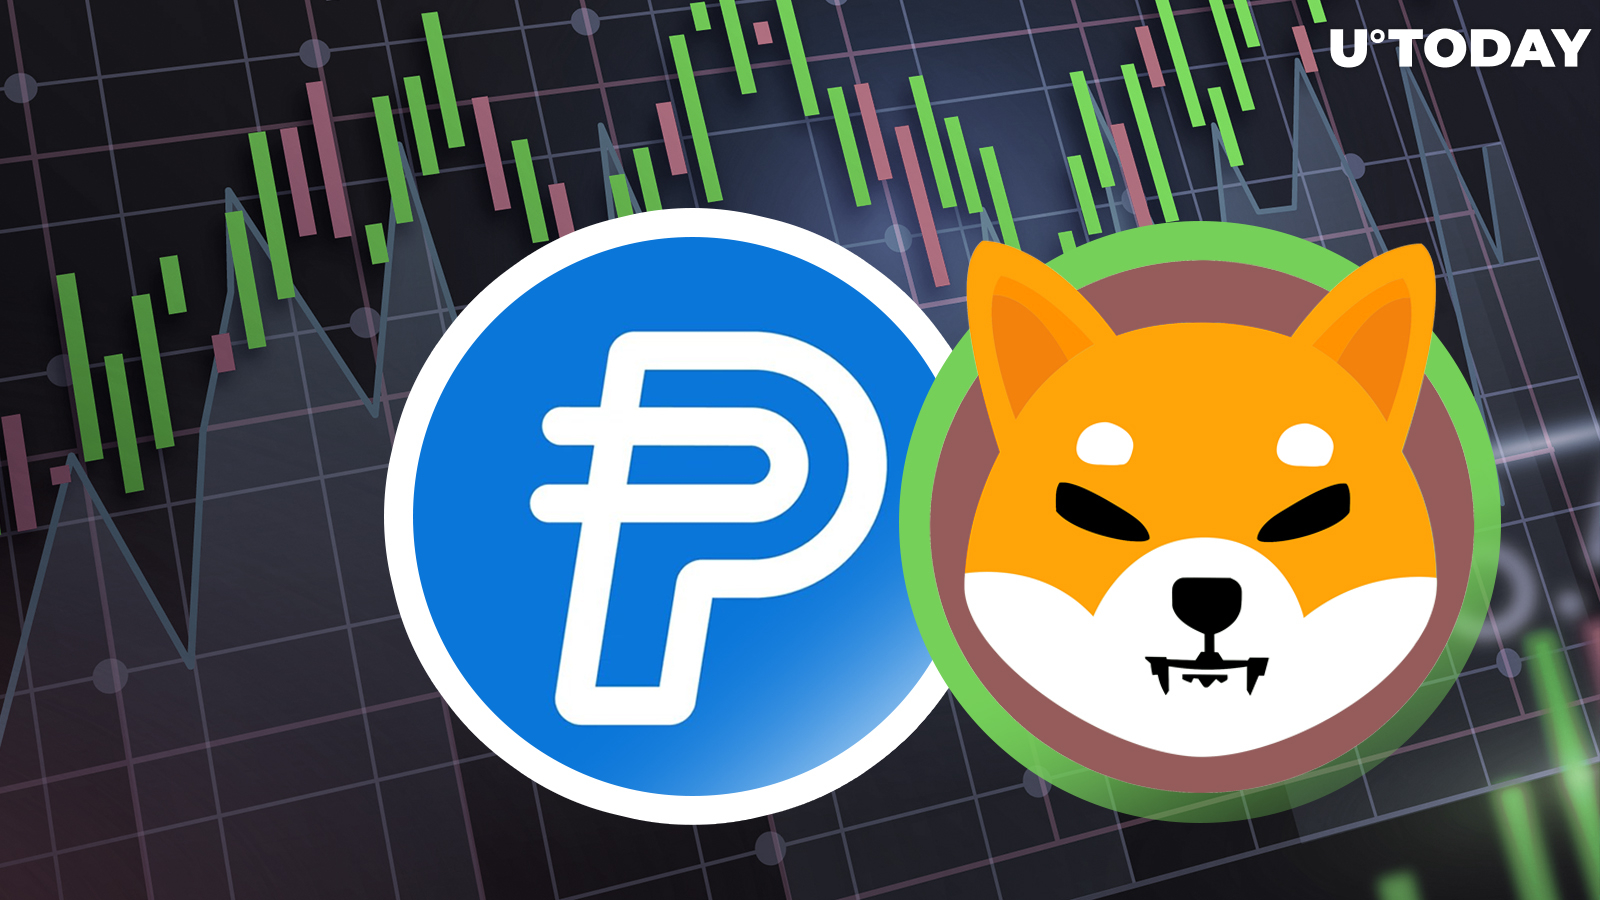 SHI Stablecoin Will Be Game-changer, While PayPal Stablecoin PYUSD Is Not: SHIB Team Member